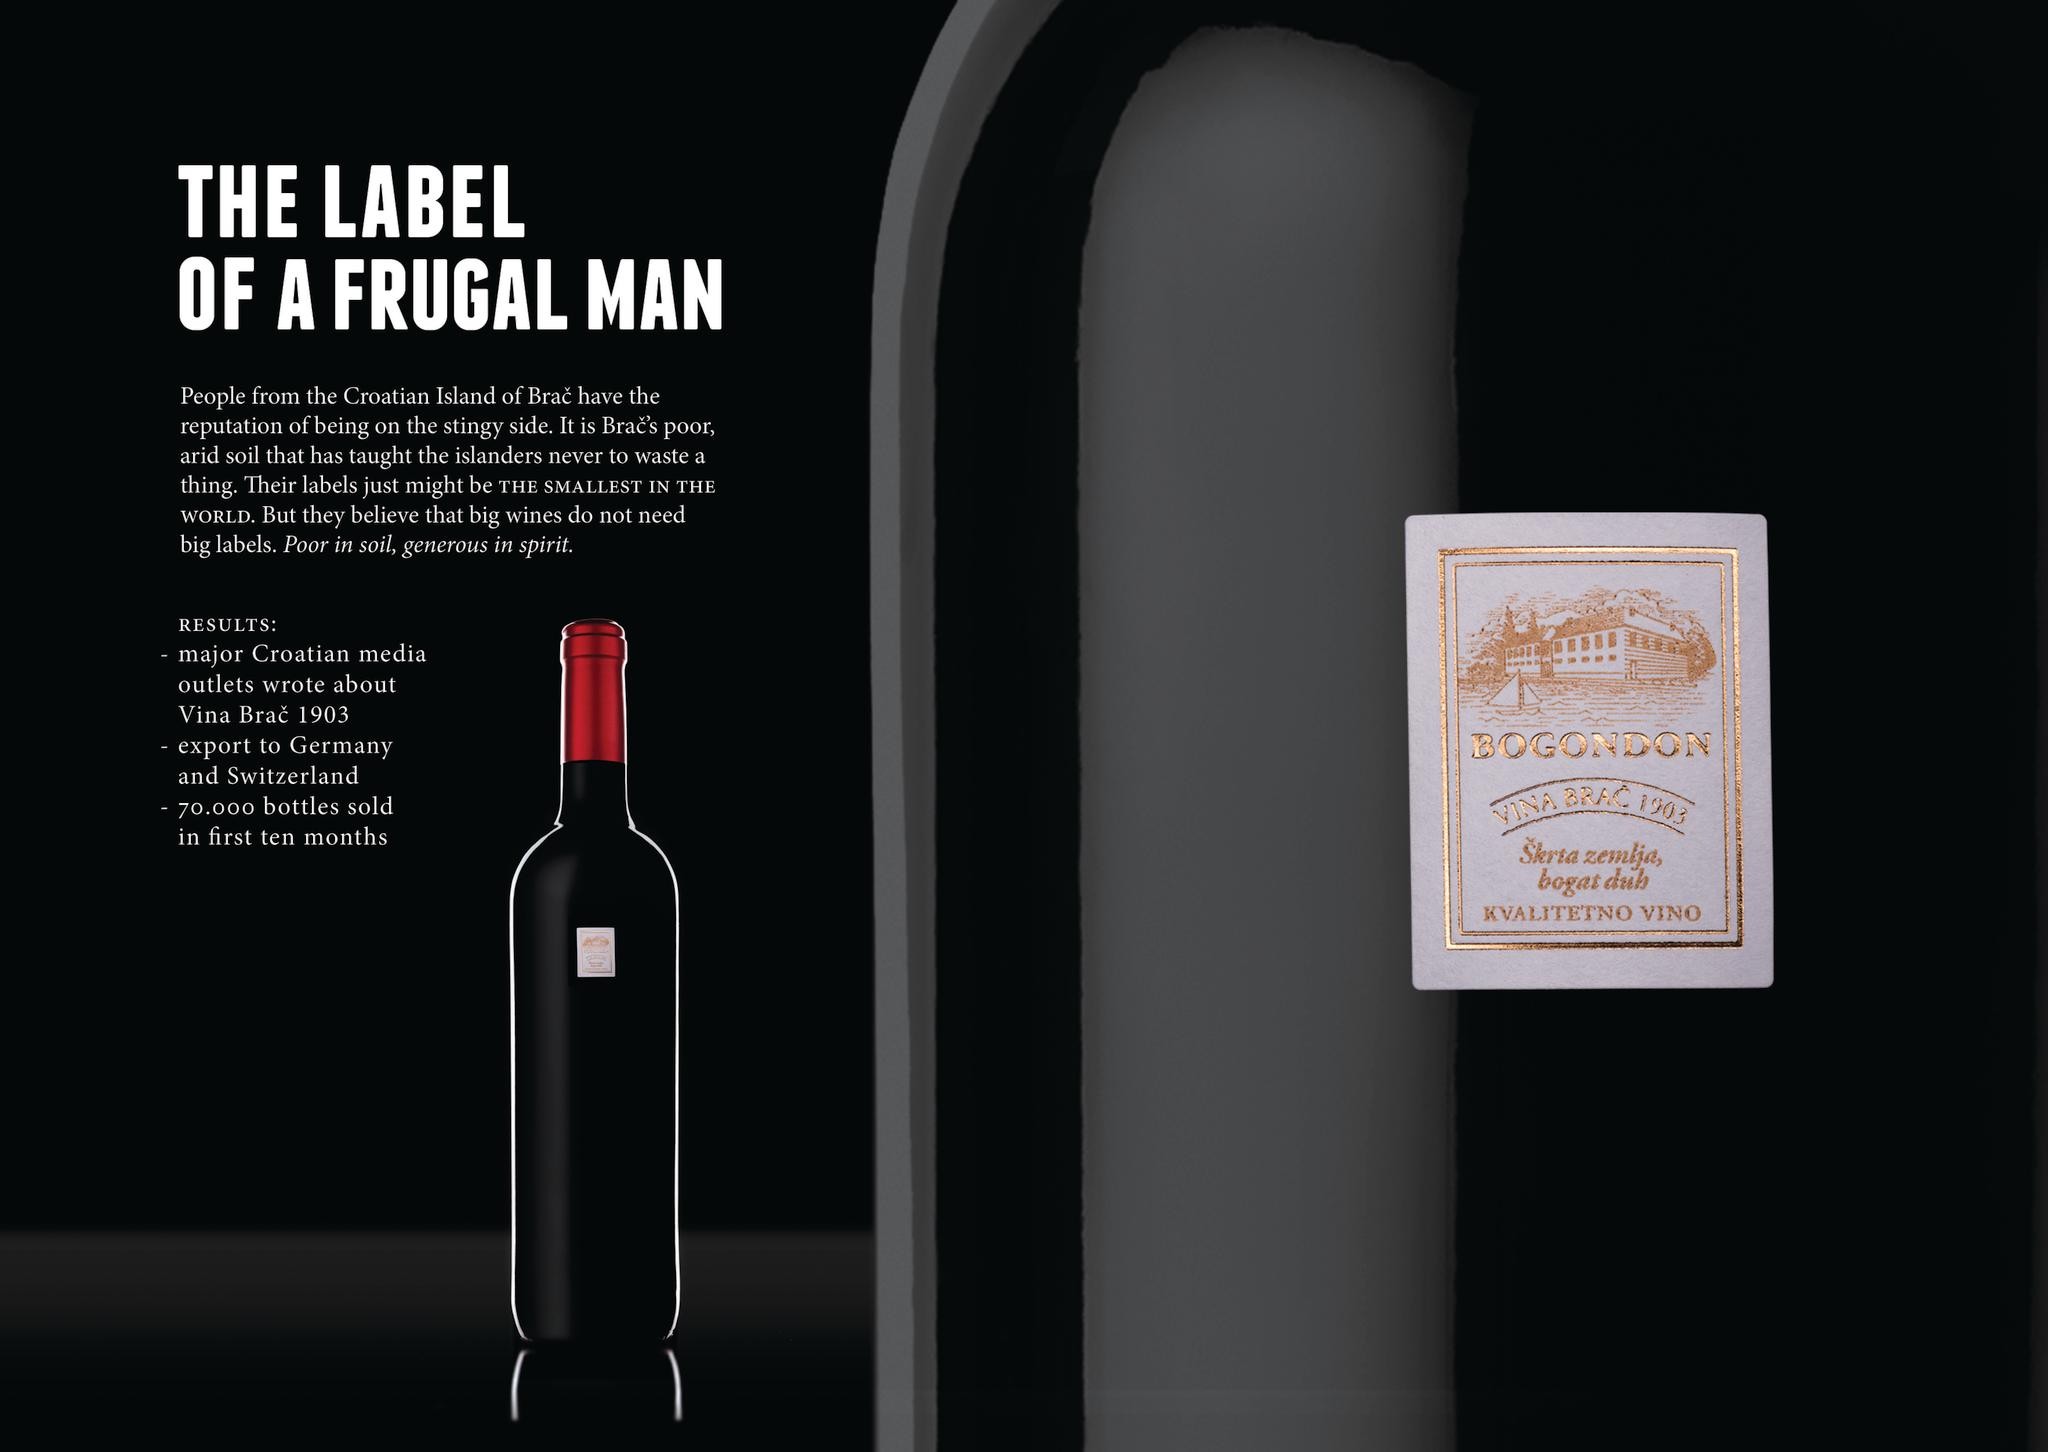 The label of a frugal man